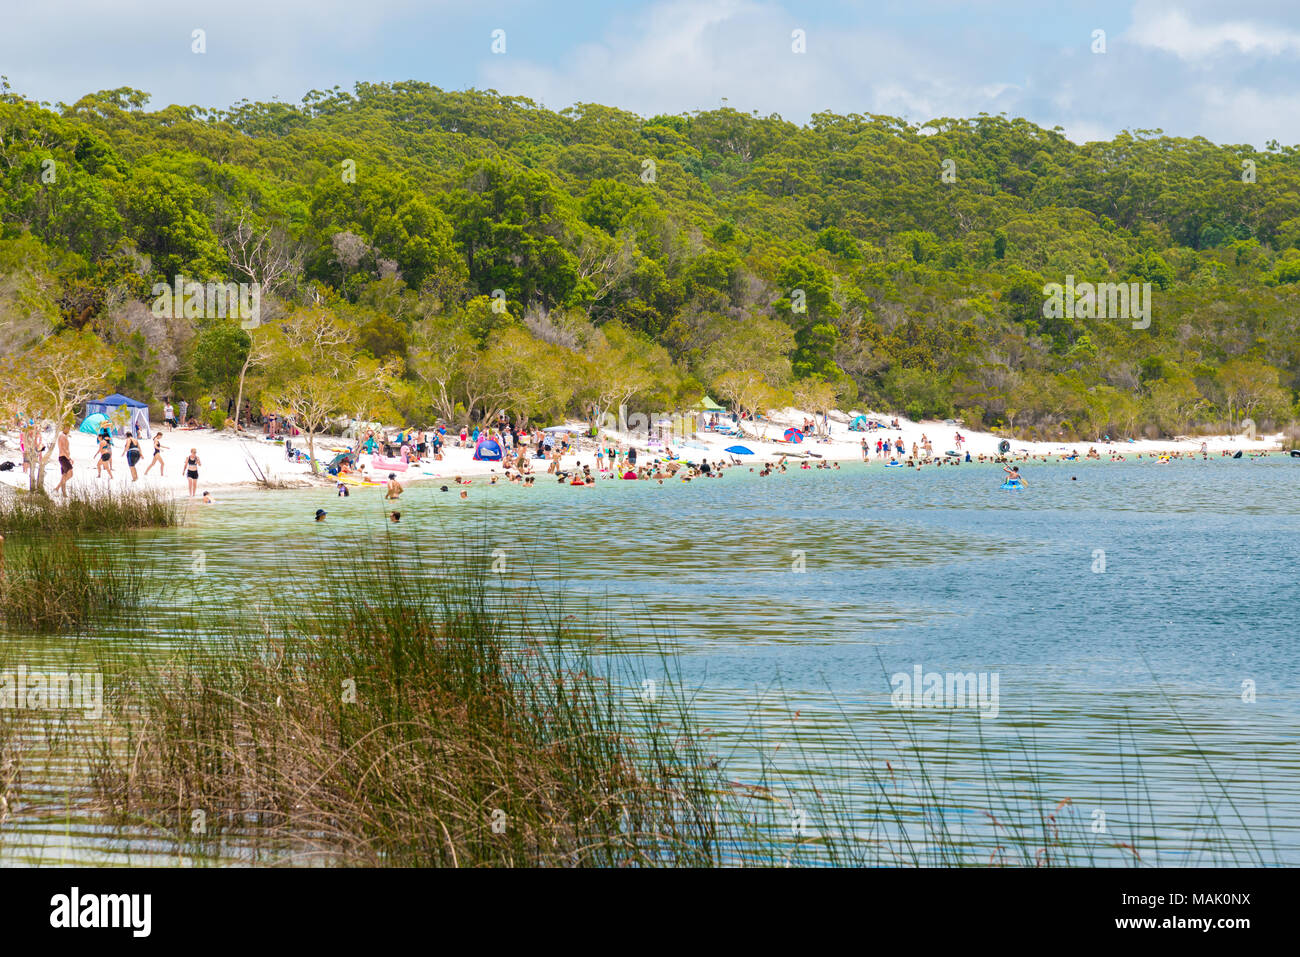 Fraser Island, QLD, Australia - December 31, 2017: People at the beach at Lake McKenzie, one of the popular freshwater lake at Fraser Island Stock Photo